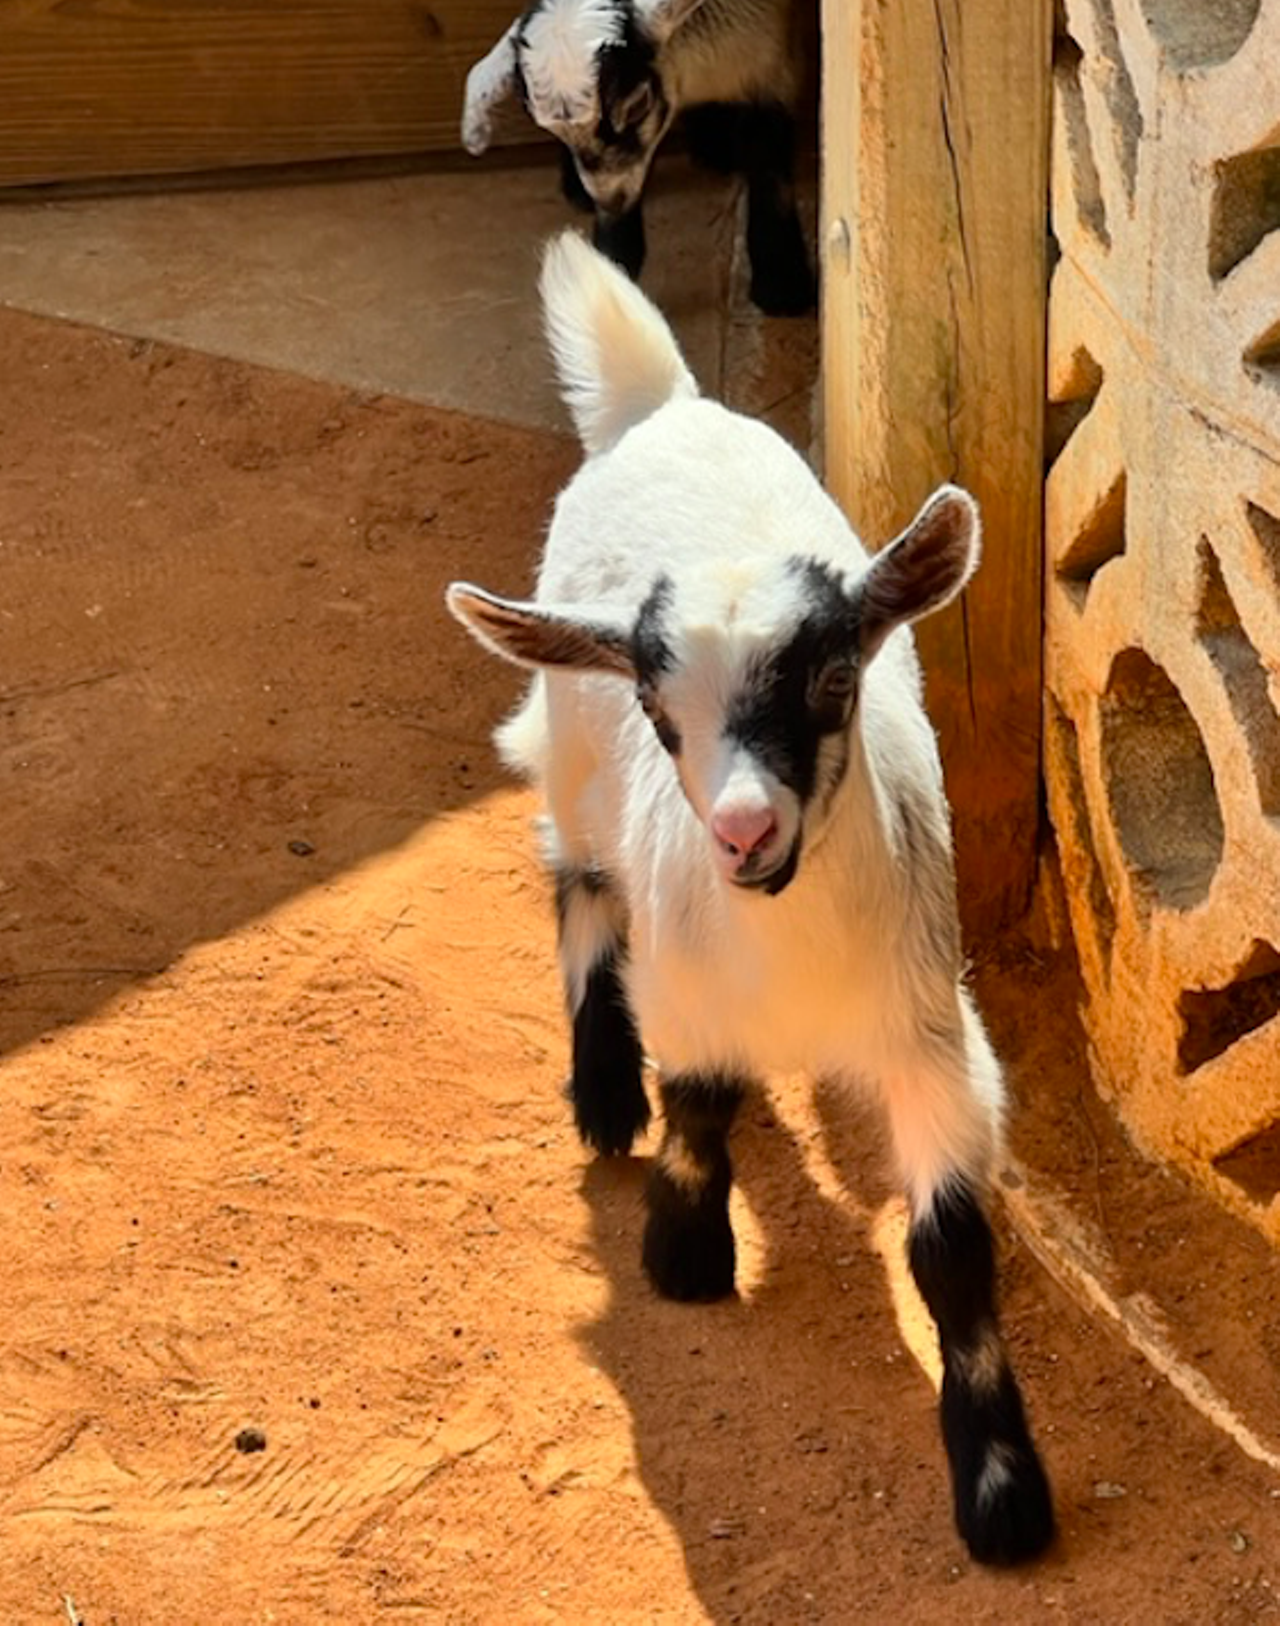 New beginnings at Gatorland: baby goats, rescue gator and Croc Rock